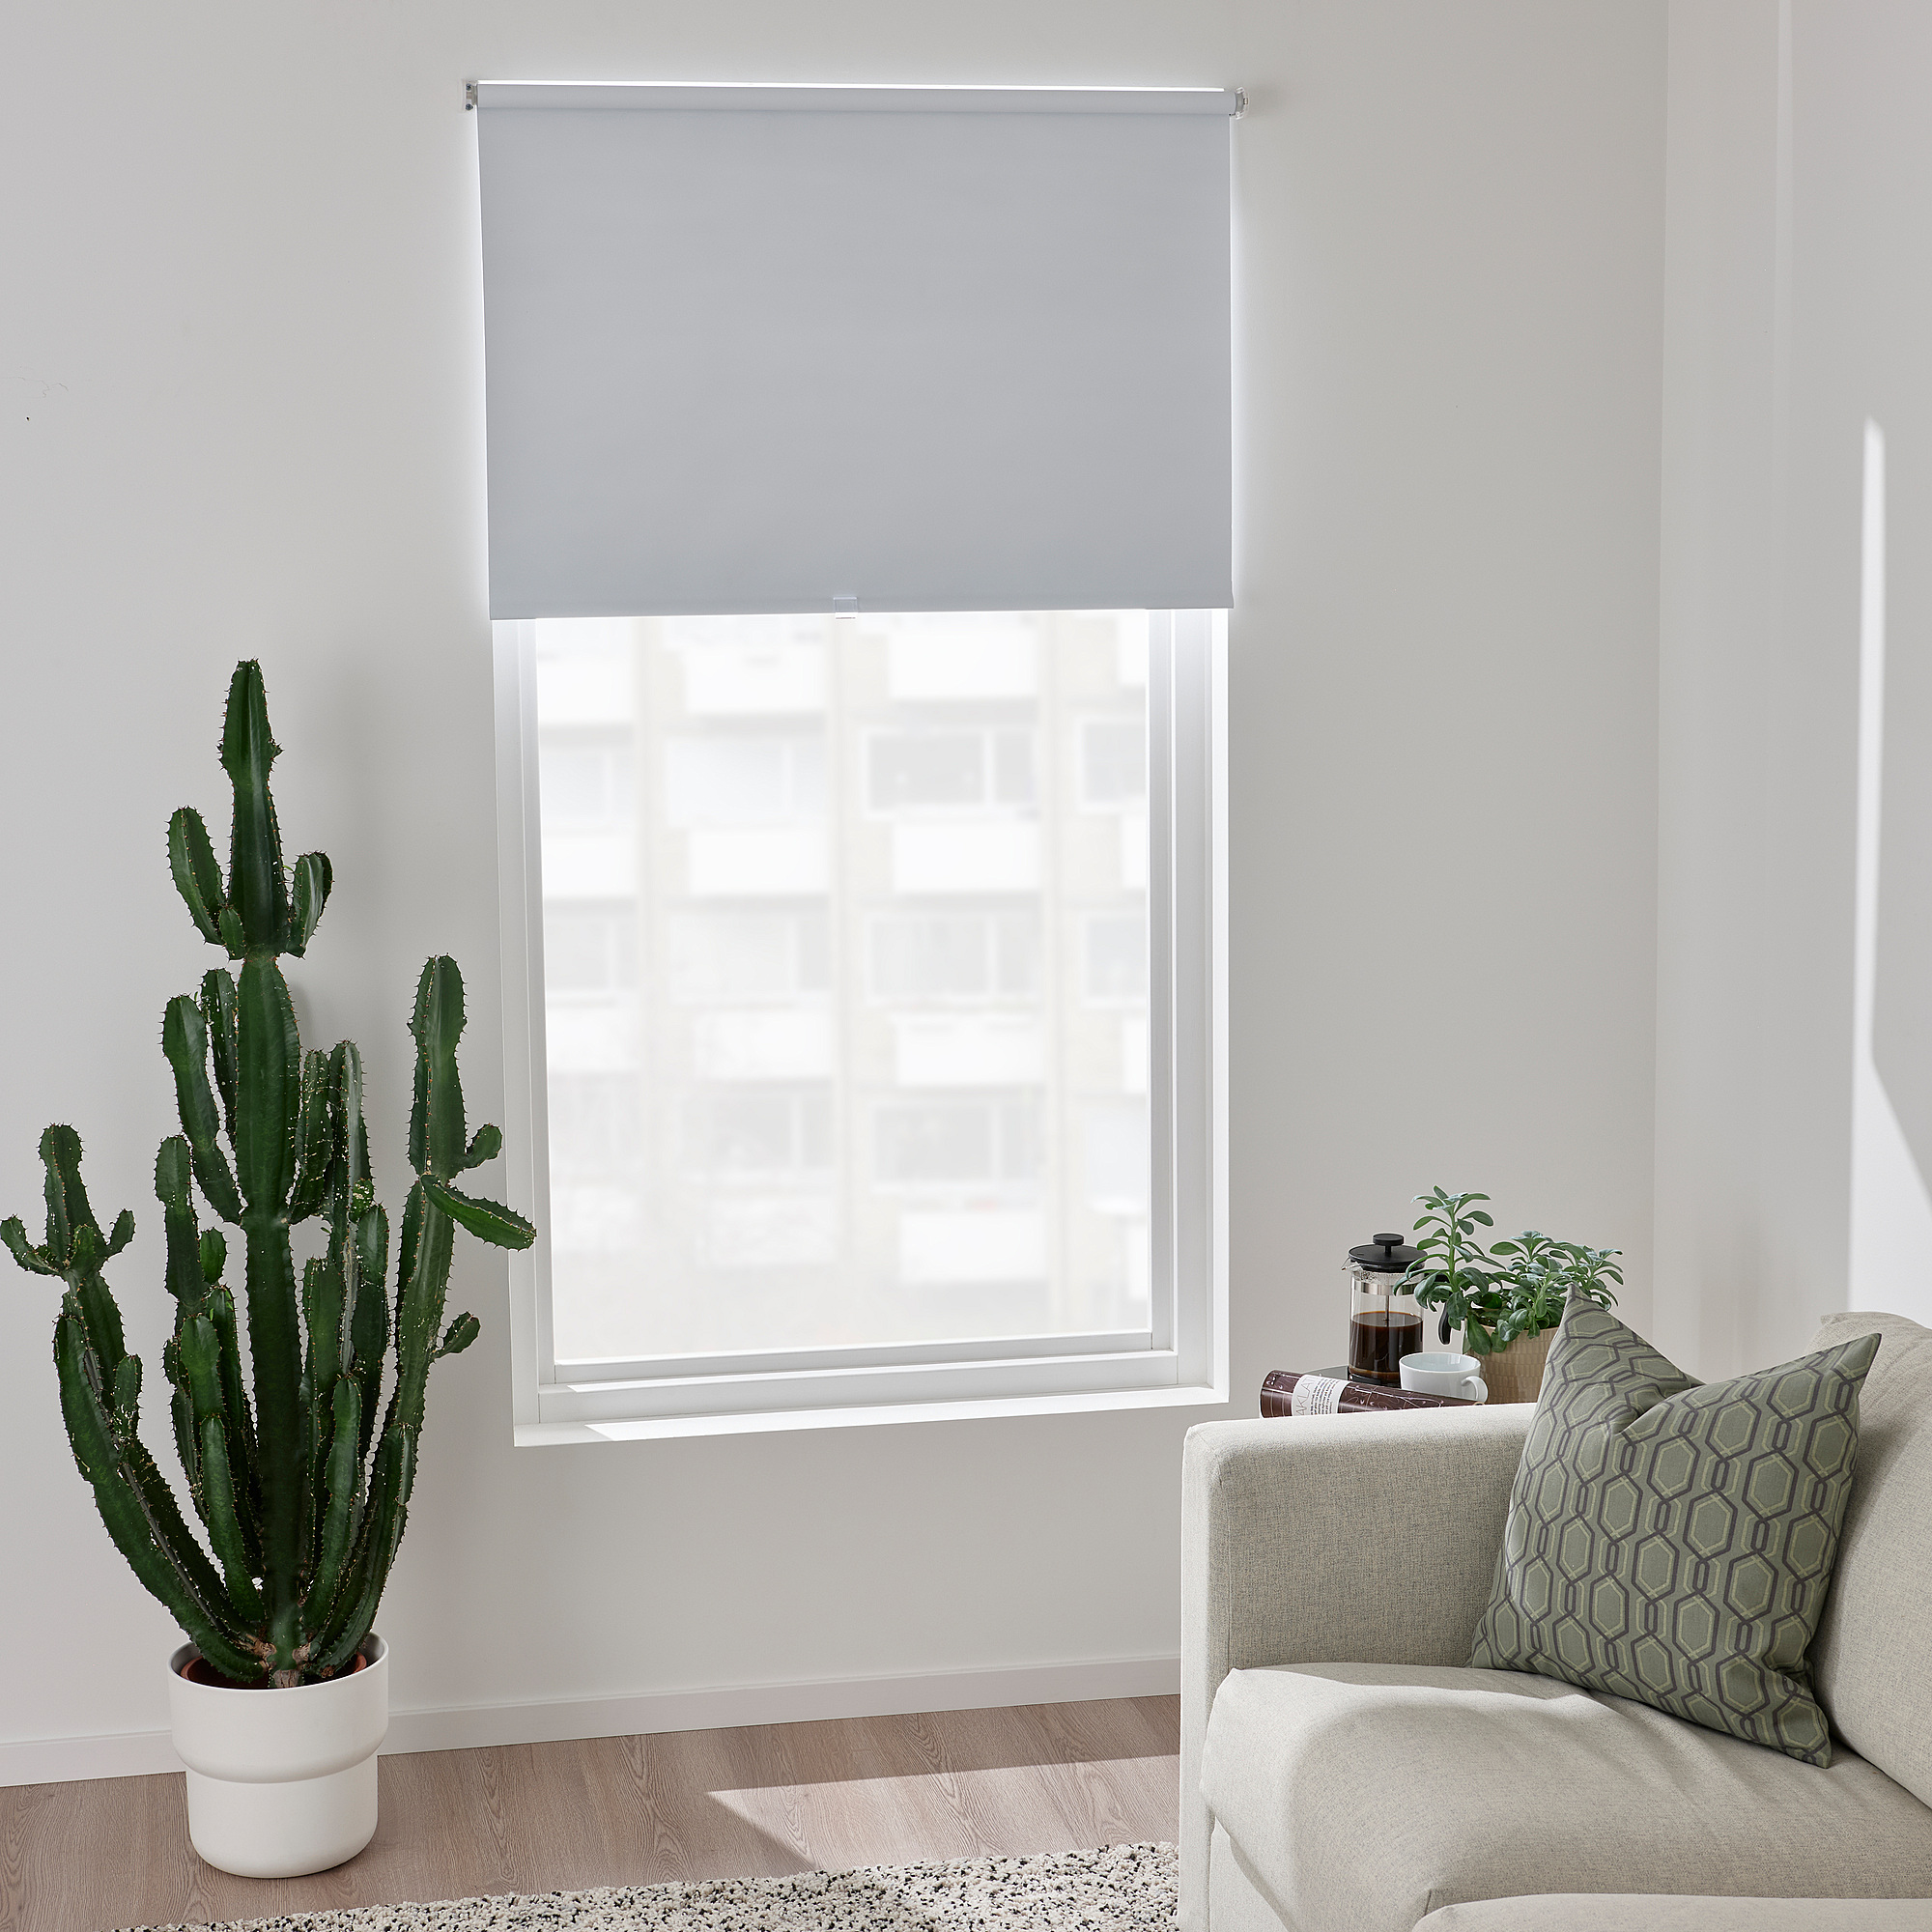 FÖNSTERBLAD Block-out roller blind - white 120x155 cm (47 ¼x61 )